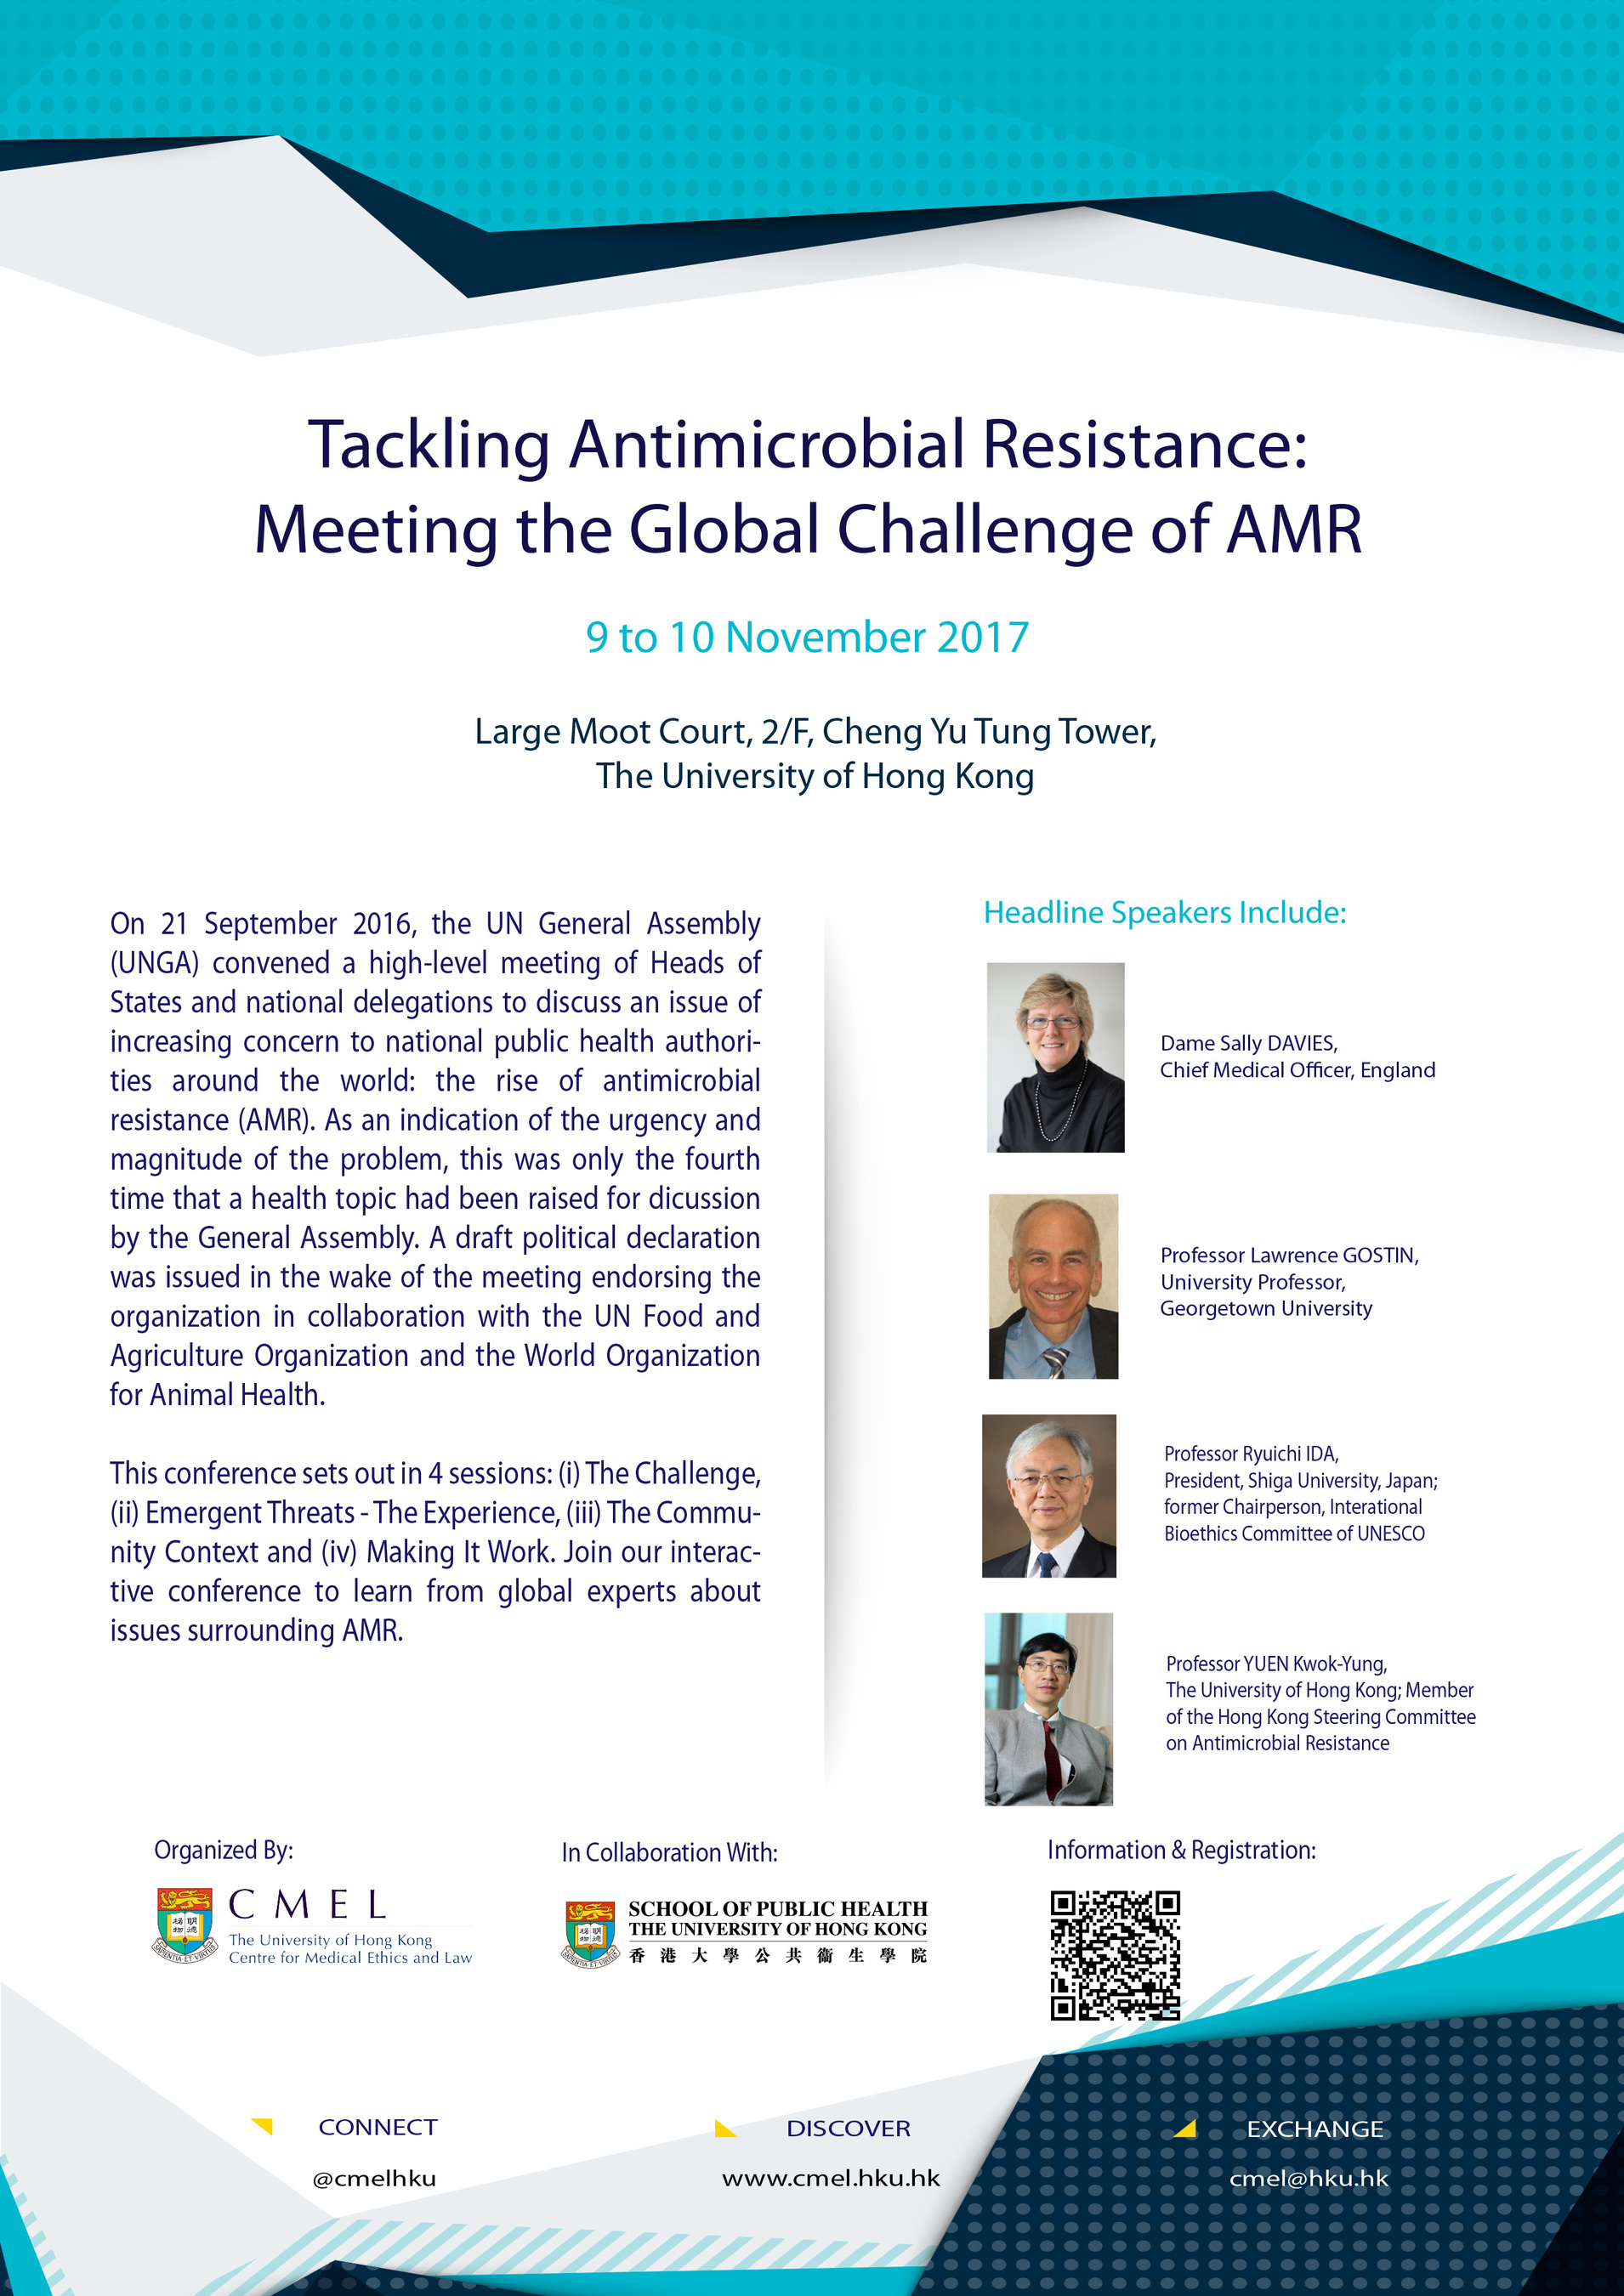 Tackling Antimicrobial Resistance: Meeting the Global Challenge of AMR